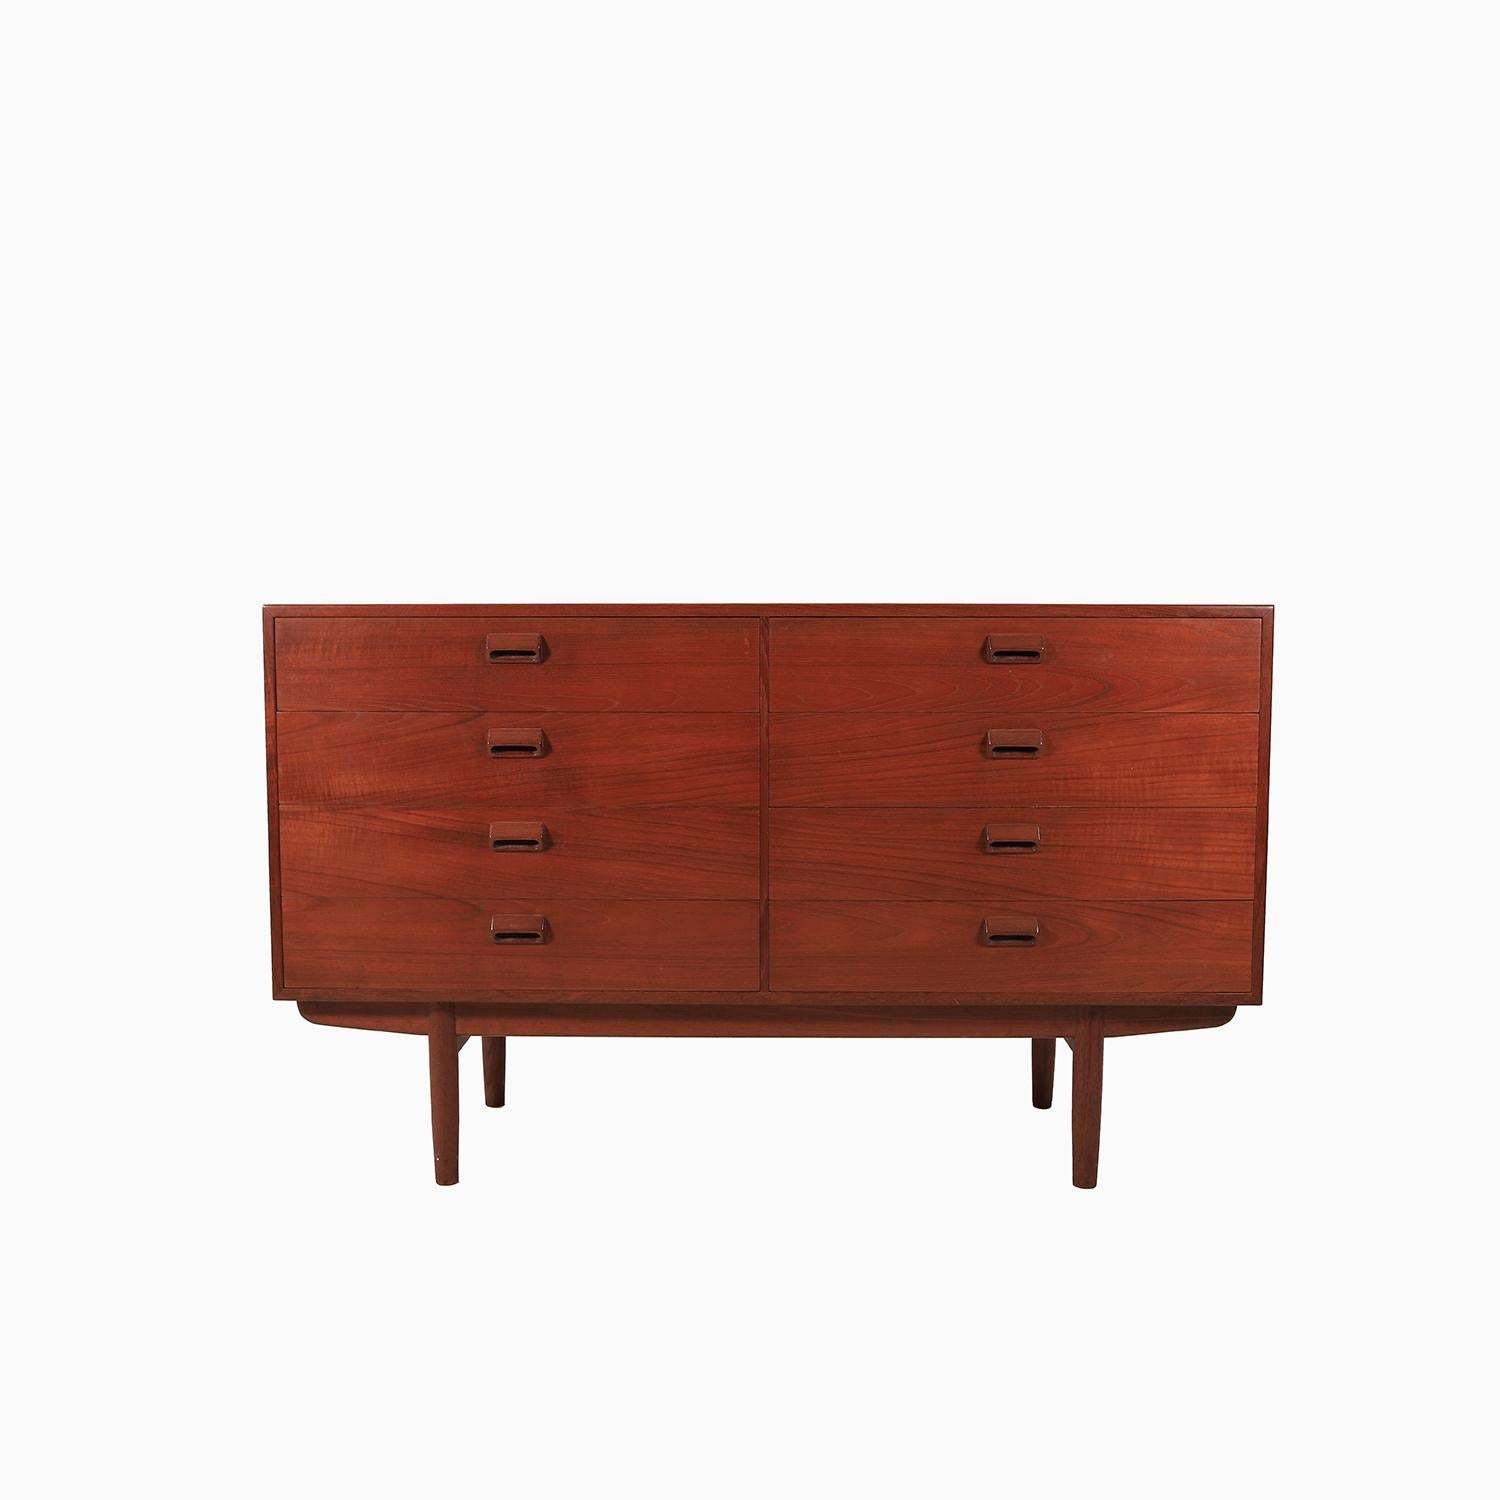 A hard to find 8 drawer chest designed by Borge Mogensen for Soborg Mobler. Exceptionally well made. Teak case and with teak base.

Professional, skilled furniture restoration is an integral part of what we do every day. Our goal 
is to provide